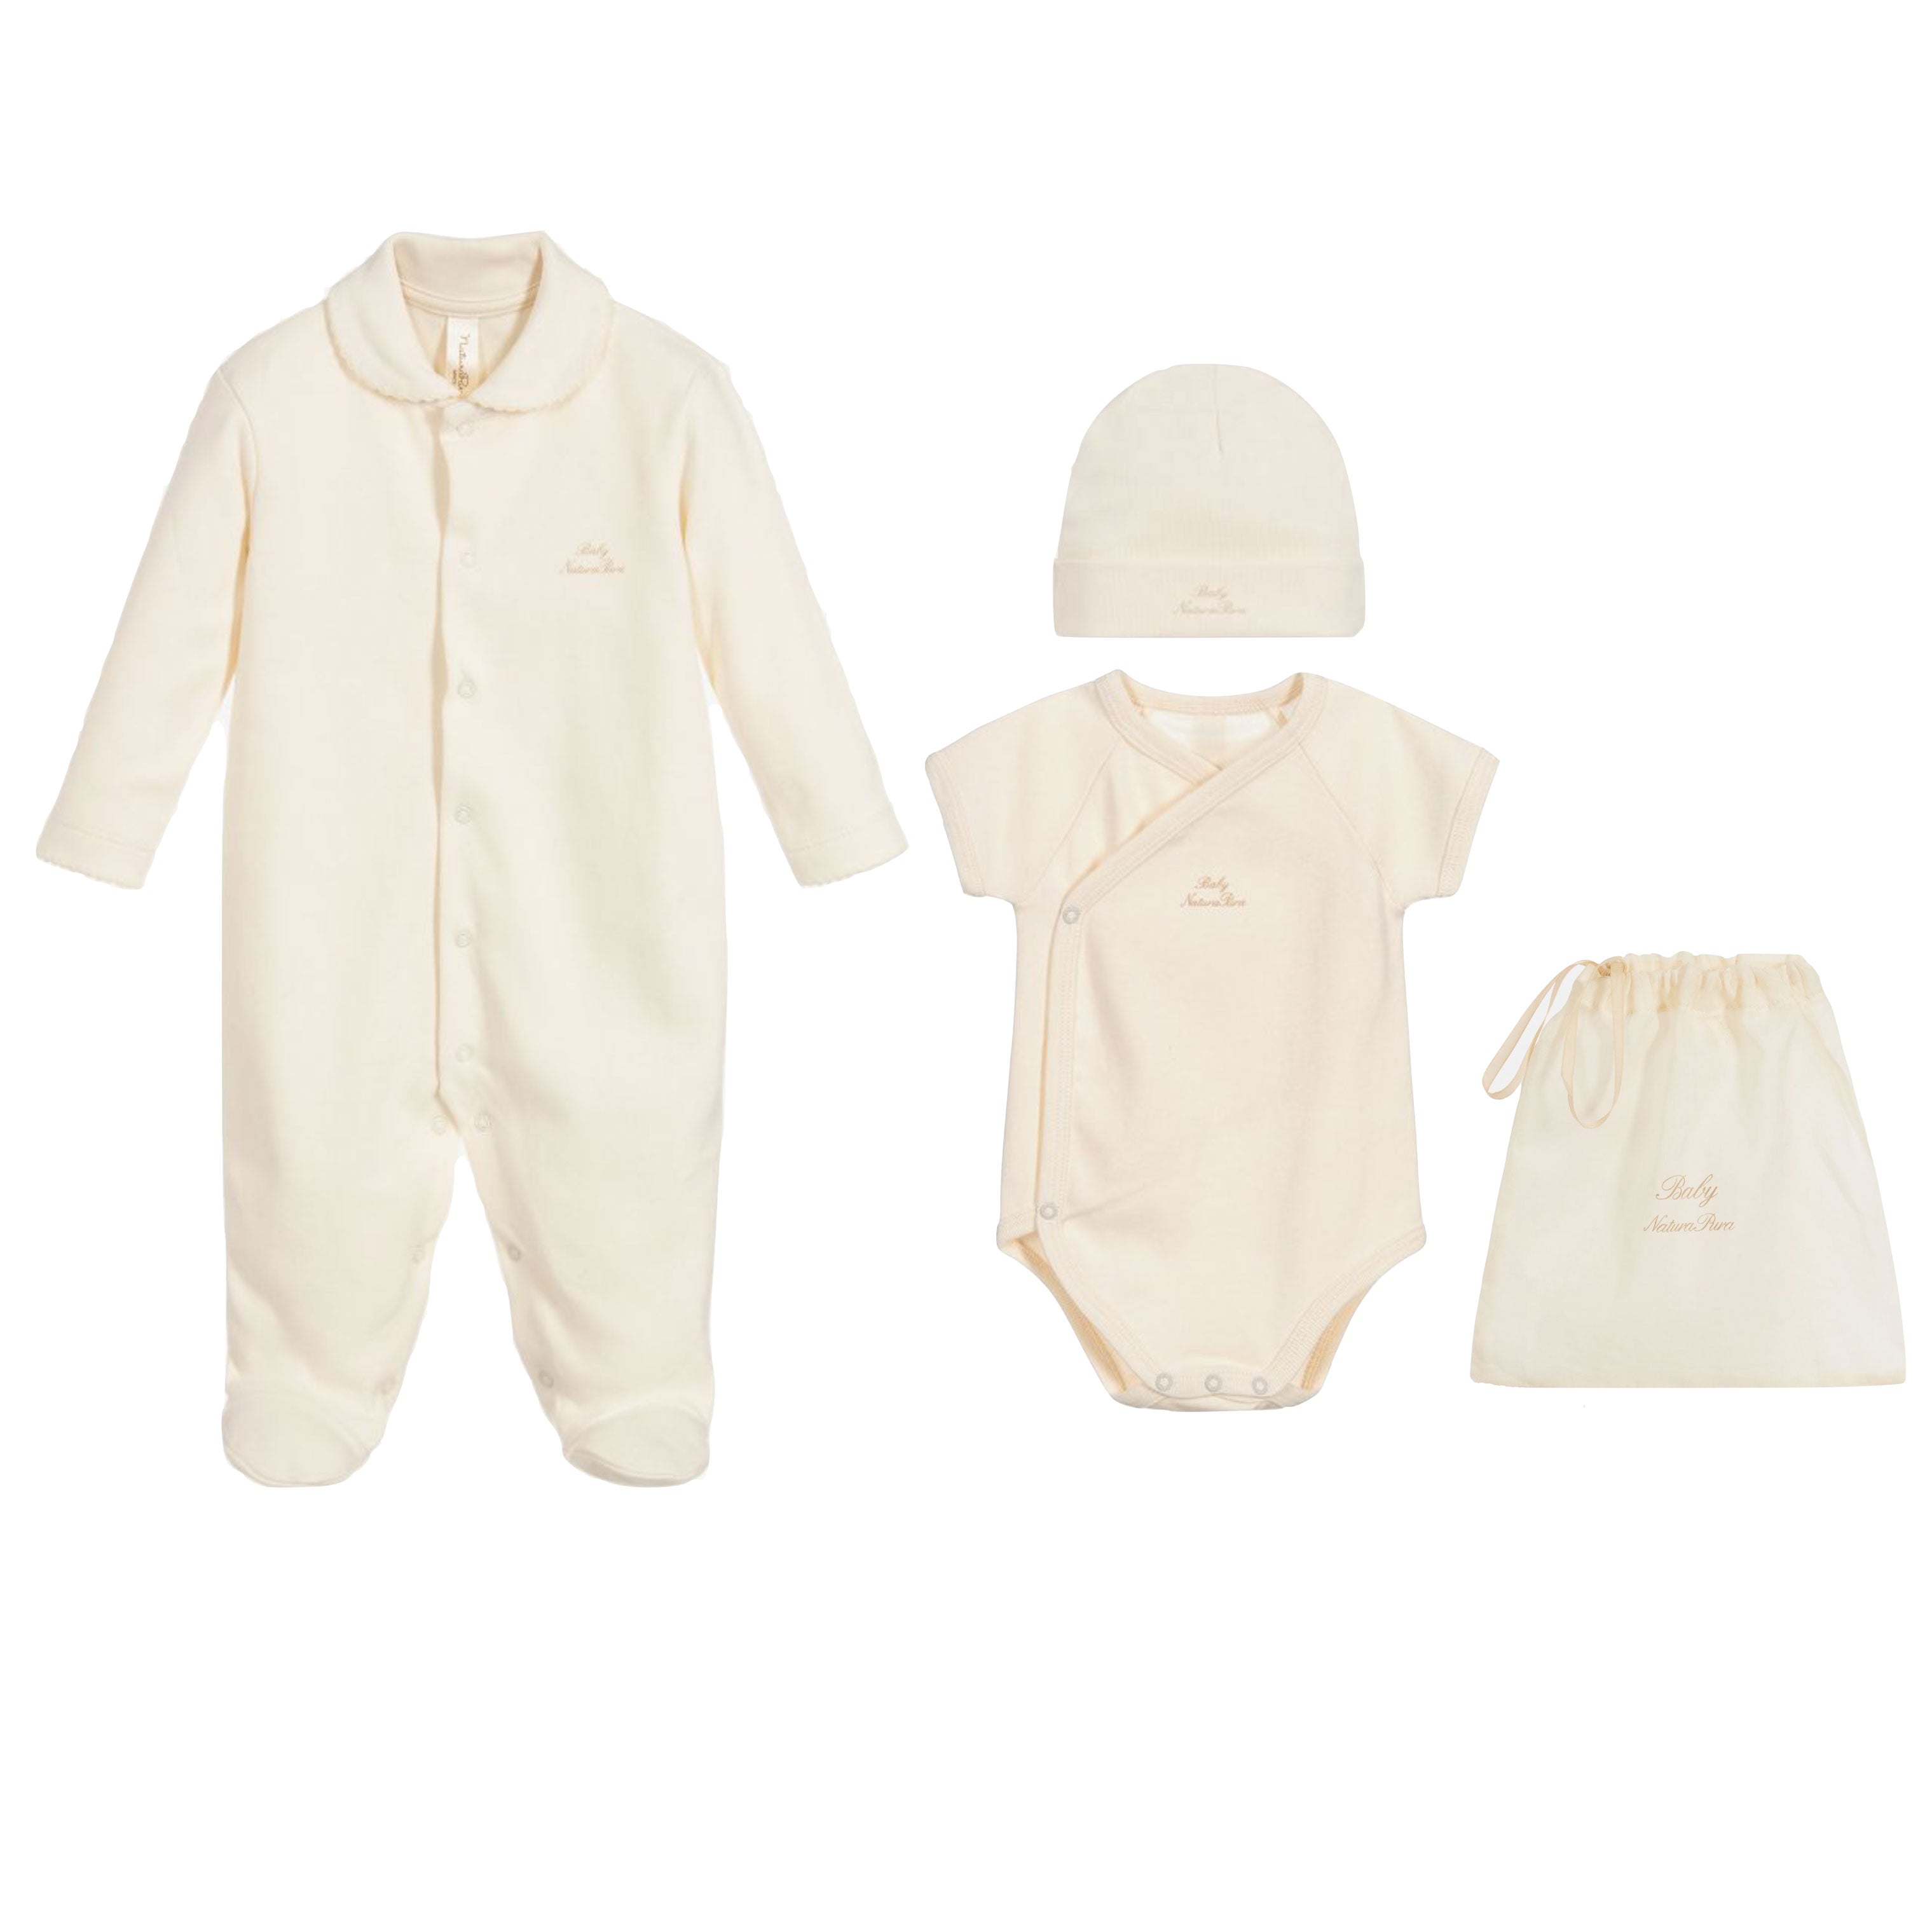 Luxury Welcome Home Baby Gift of 4 pieces in organic cotton by Naturapura at Bonjour Baby Baskets